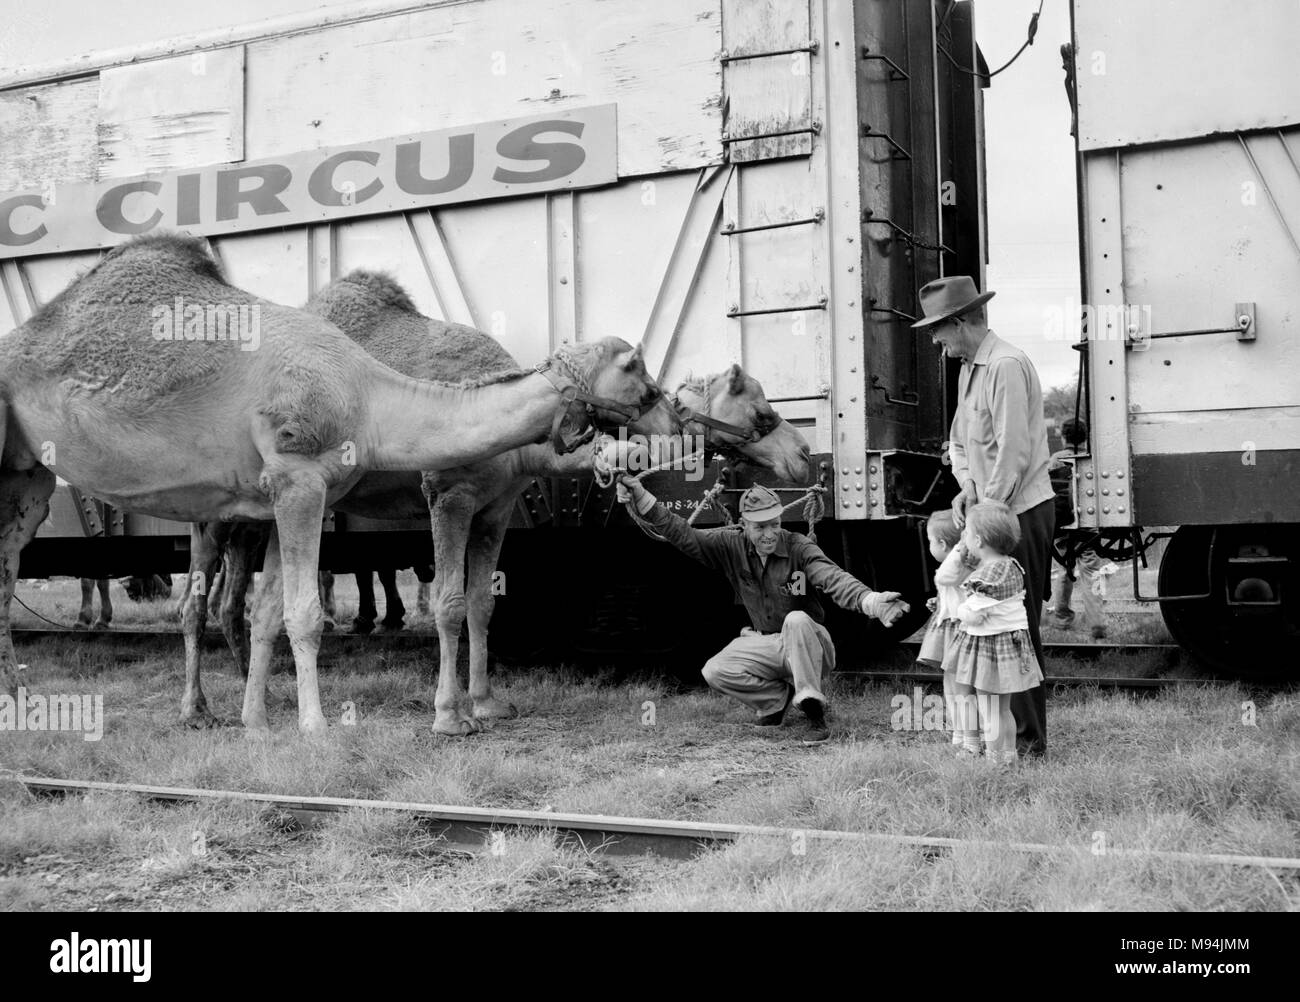 Two little girls get an up close meeting with two camels during animal unloading at the Clyde Beatty Circus in Georgia, ca. 1956. Stock Photo